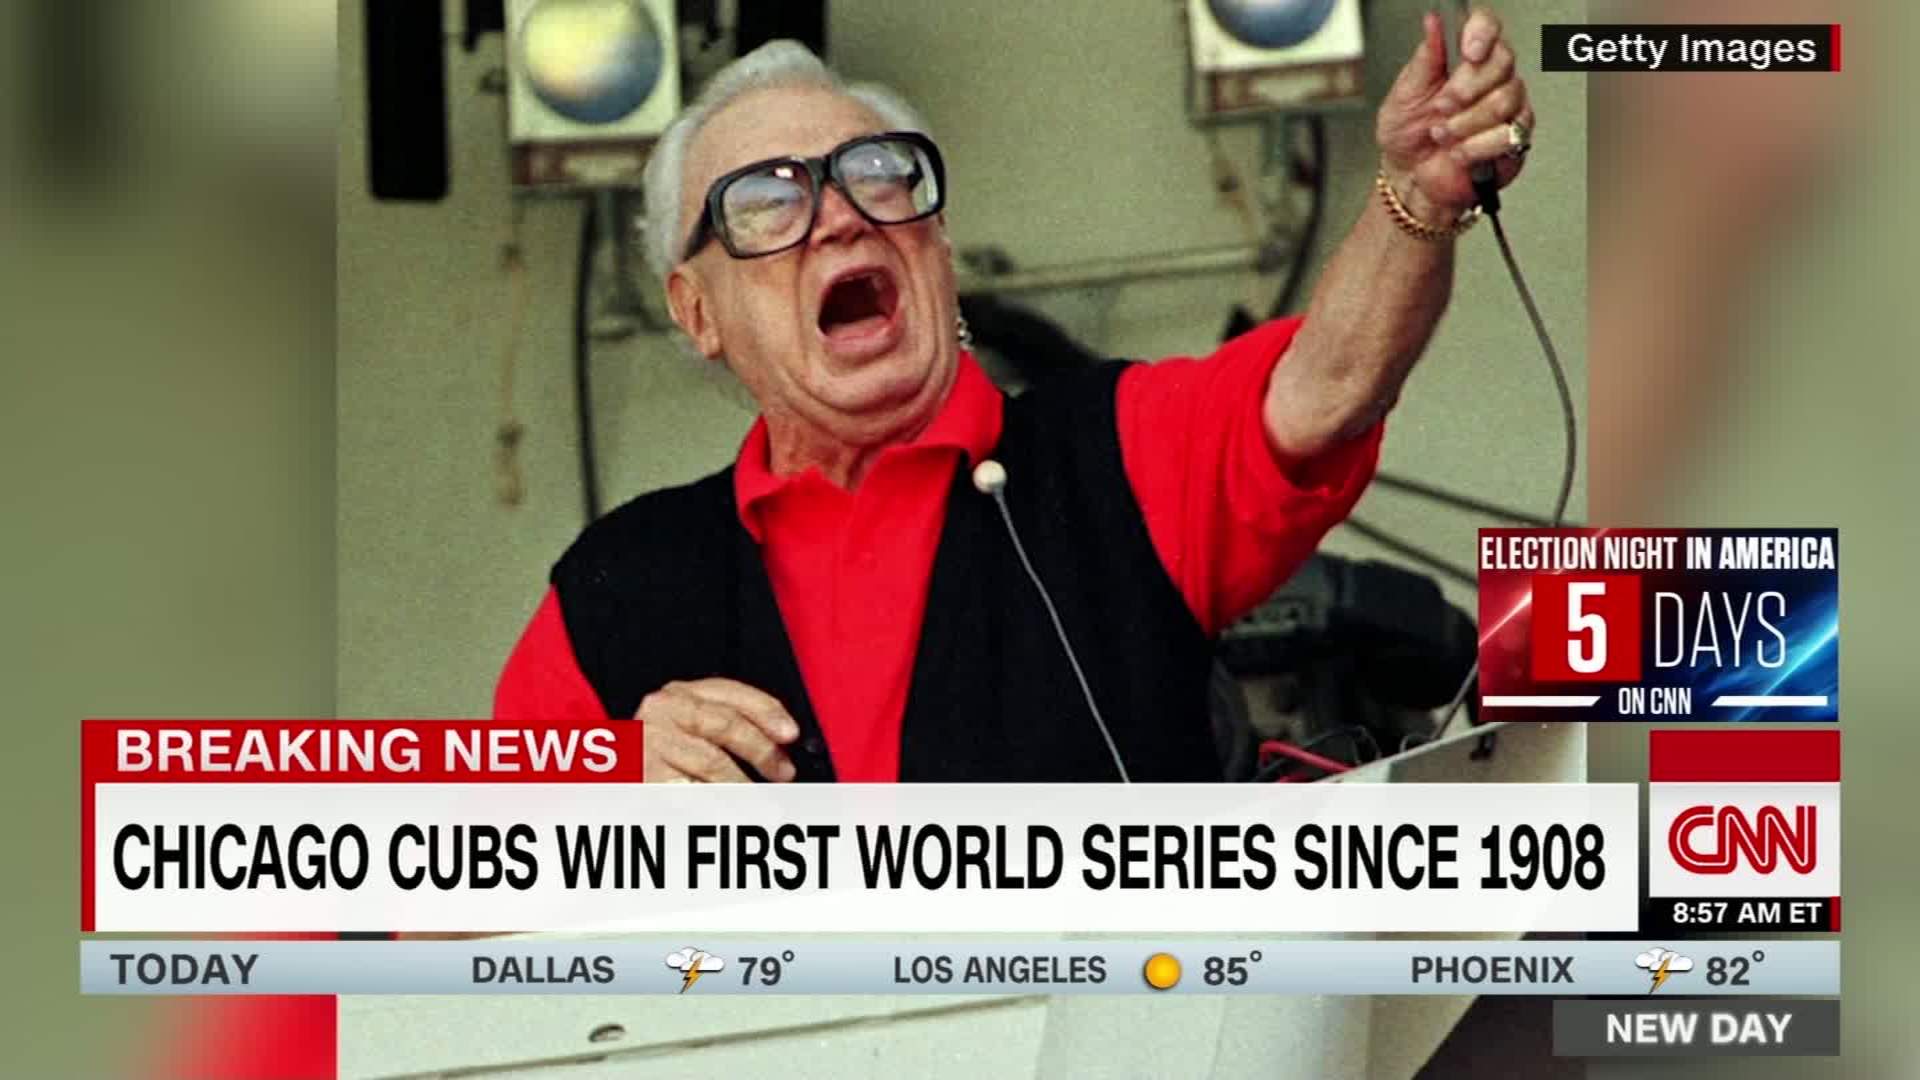 Harry Caray Someday the Chicago Cubs are going to be in the World